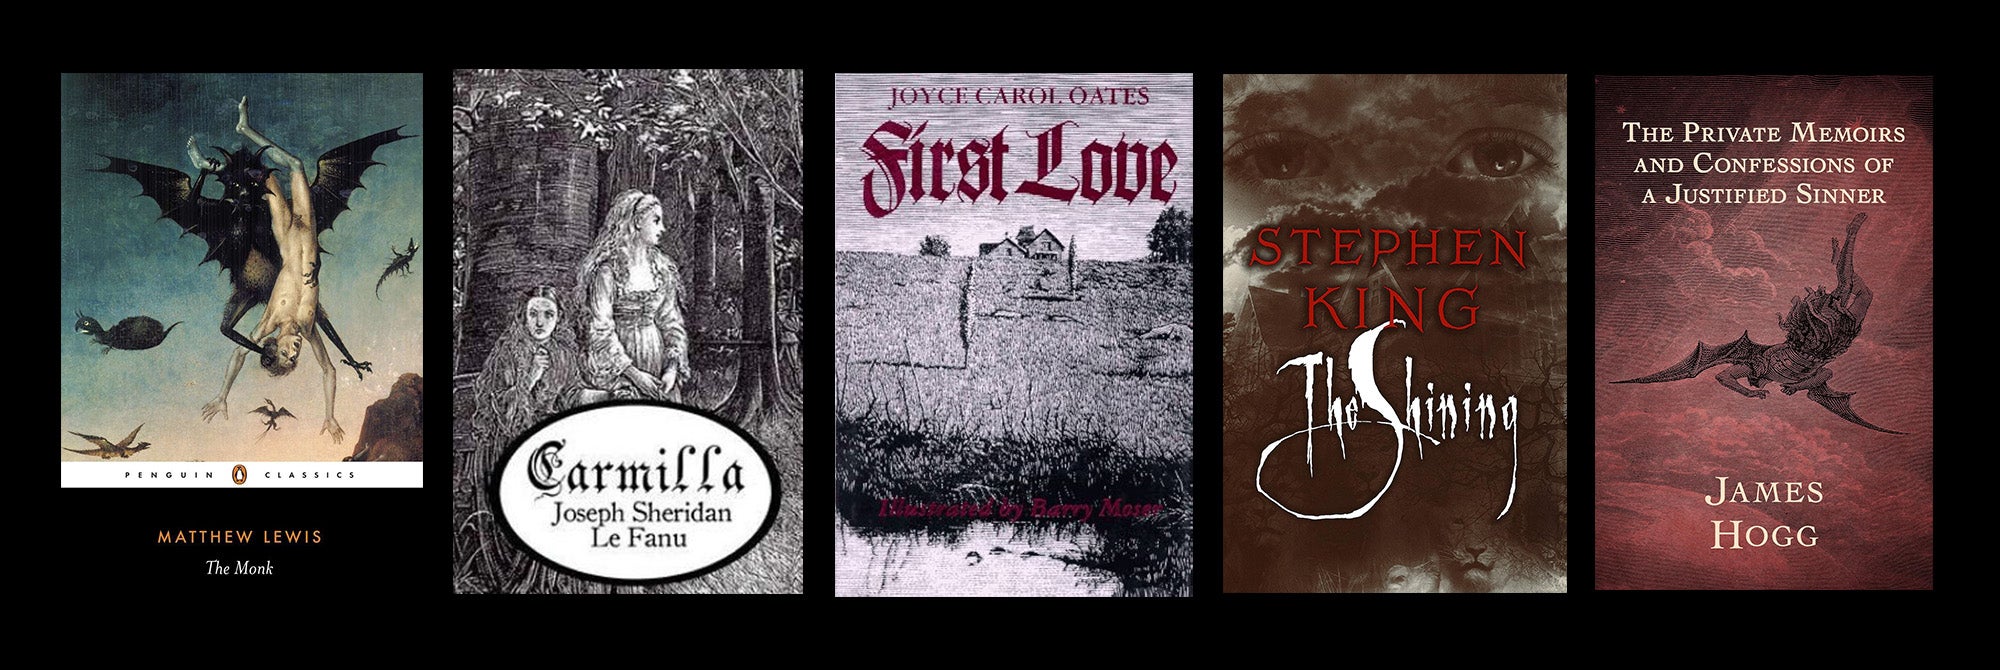 Composite of book cover art lined up from left to right: The Monk, Carmilla, First Love, The Shining, The Private Memoirs and Confessions of a Justified Sinner